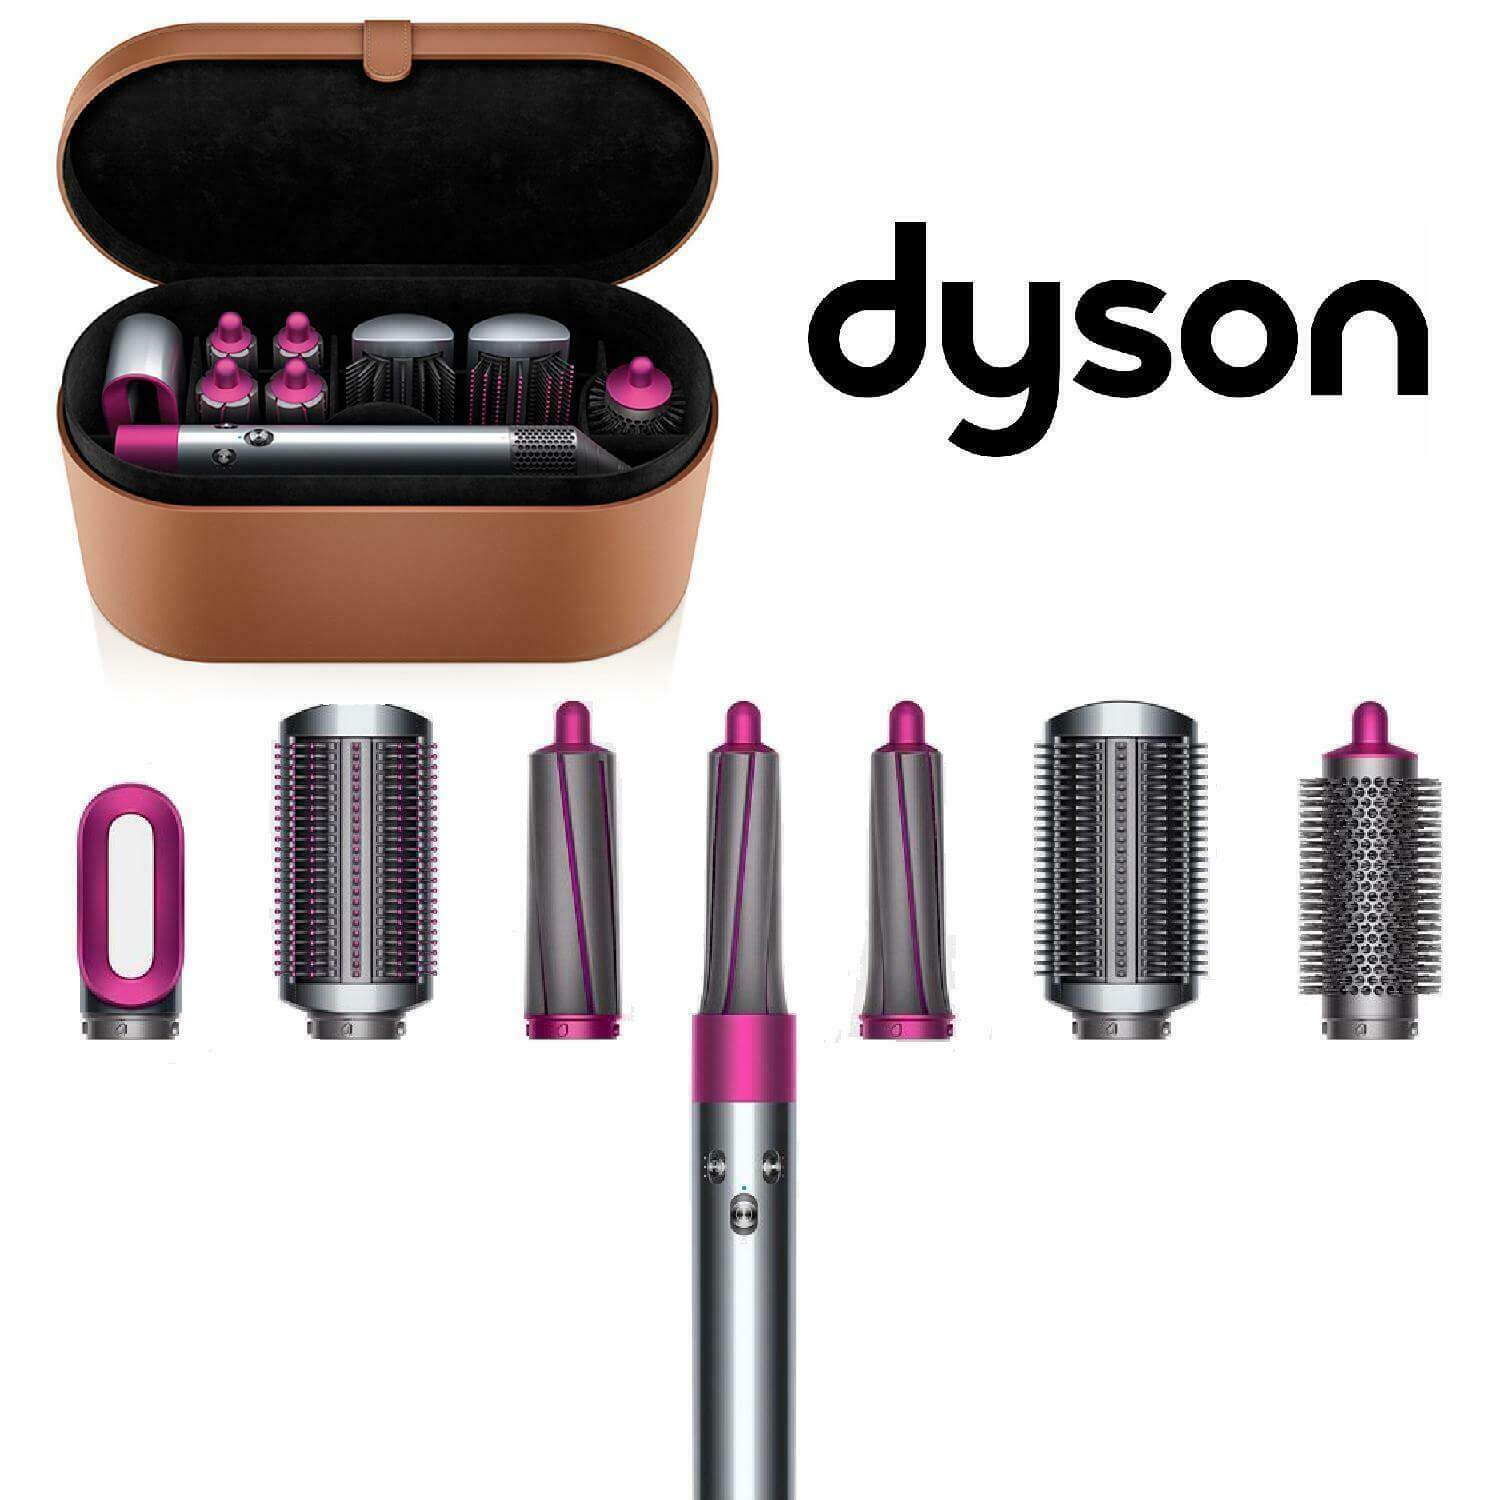 Dyson Airwrap - In hand ready to send! The Giveaway Guys